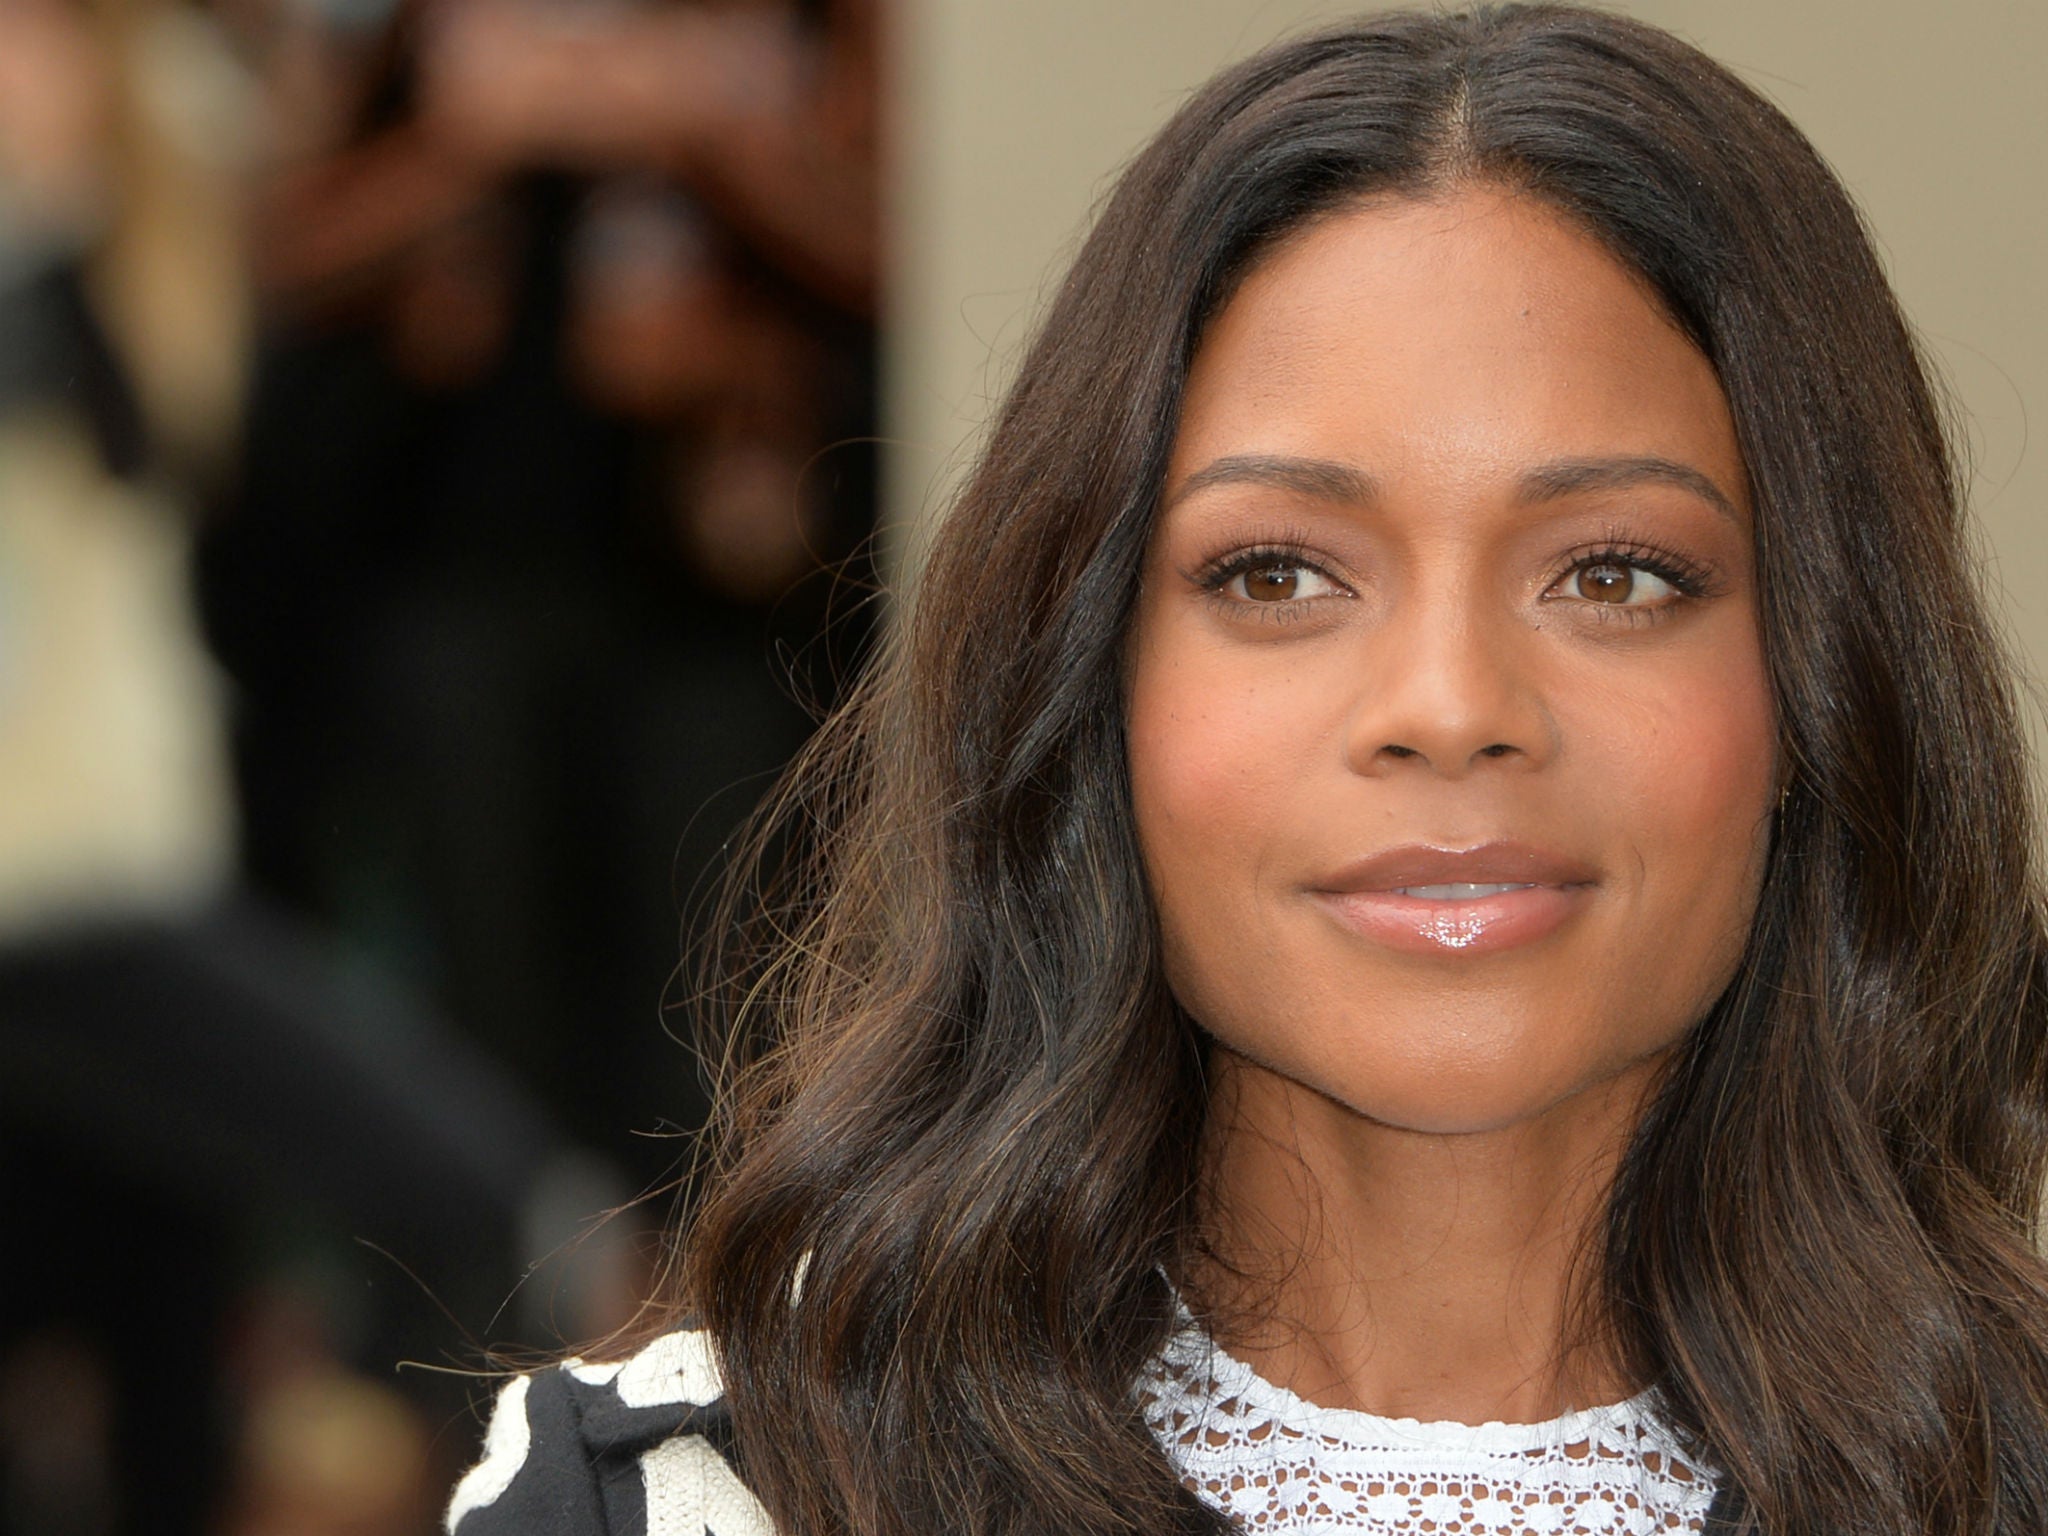 Spectre S Naomie Harris We Should Ditch Demeaning Bond Girl Term And It S Time We Stopped Talking About A Black James Bond The Independent The Independent